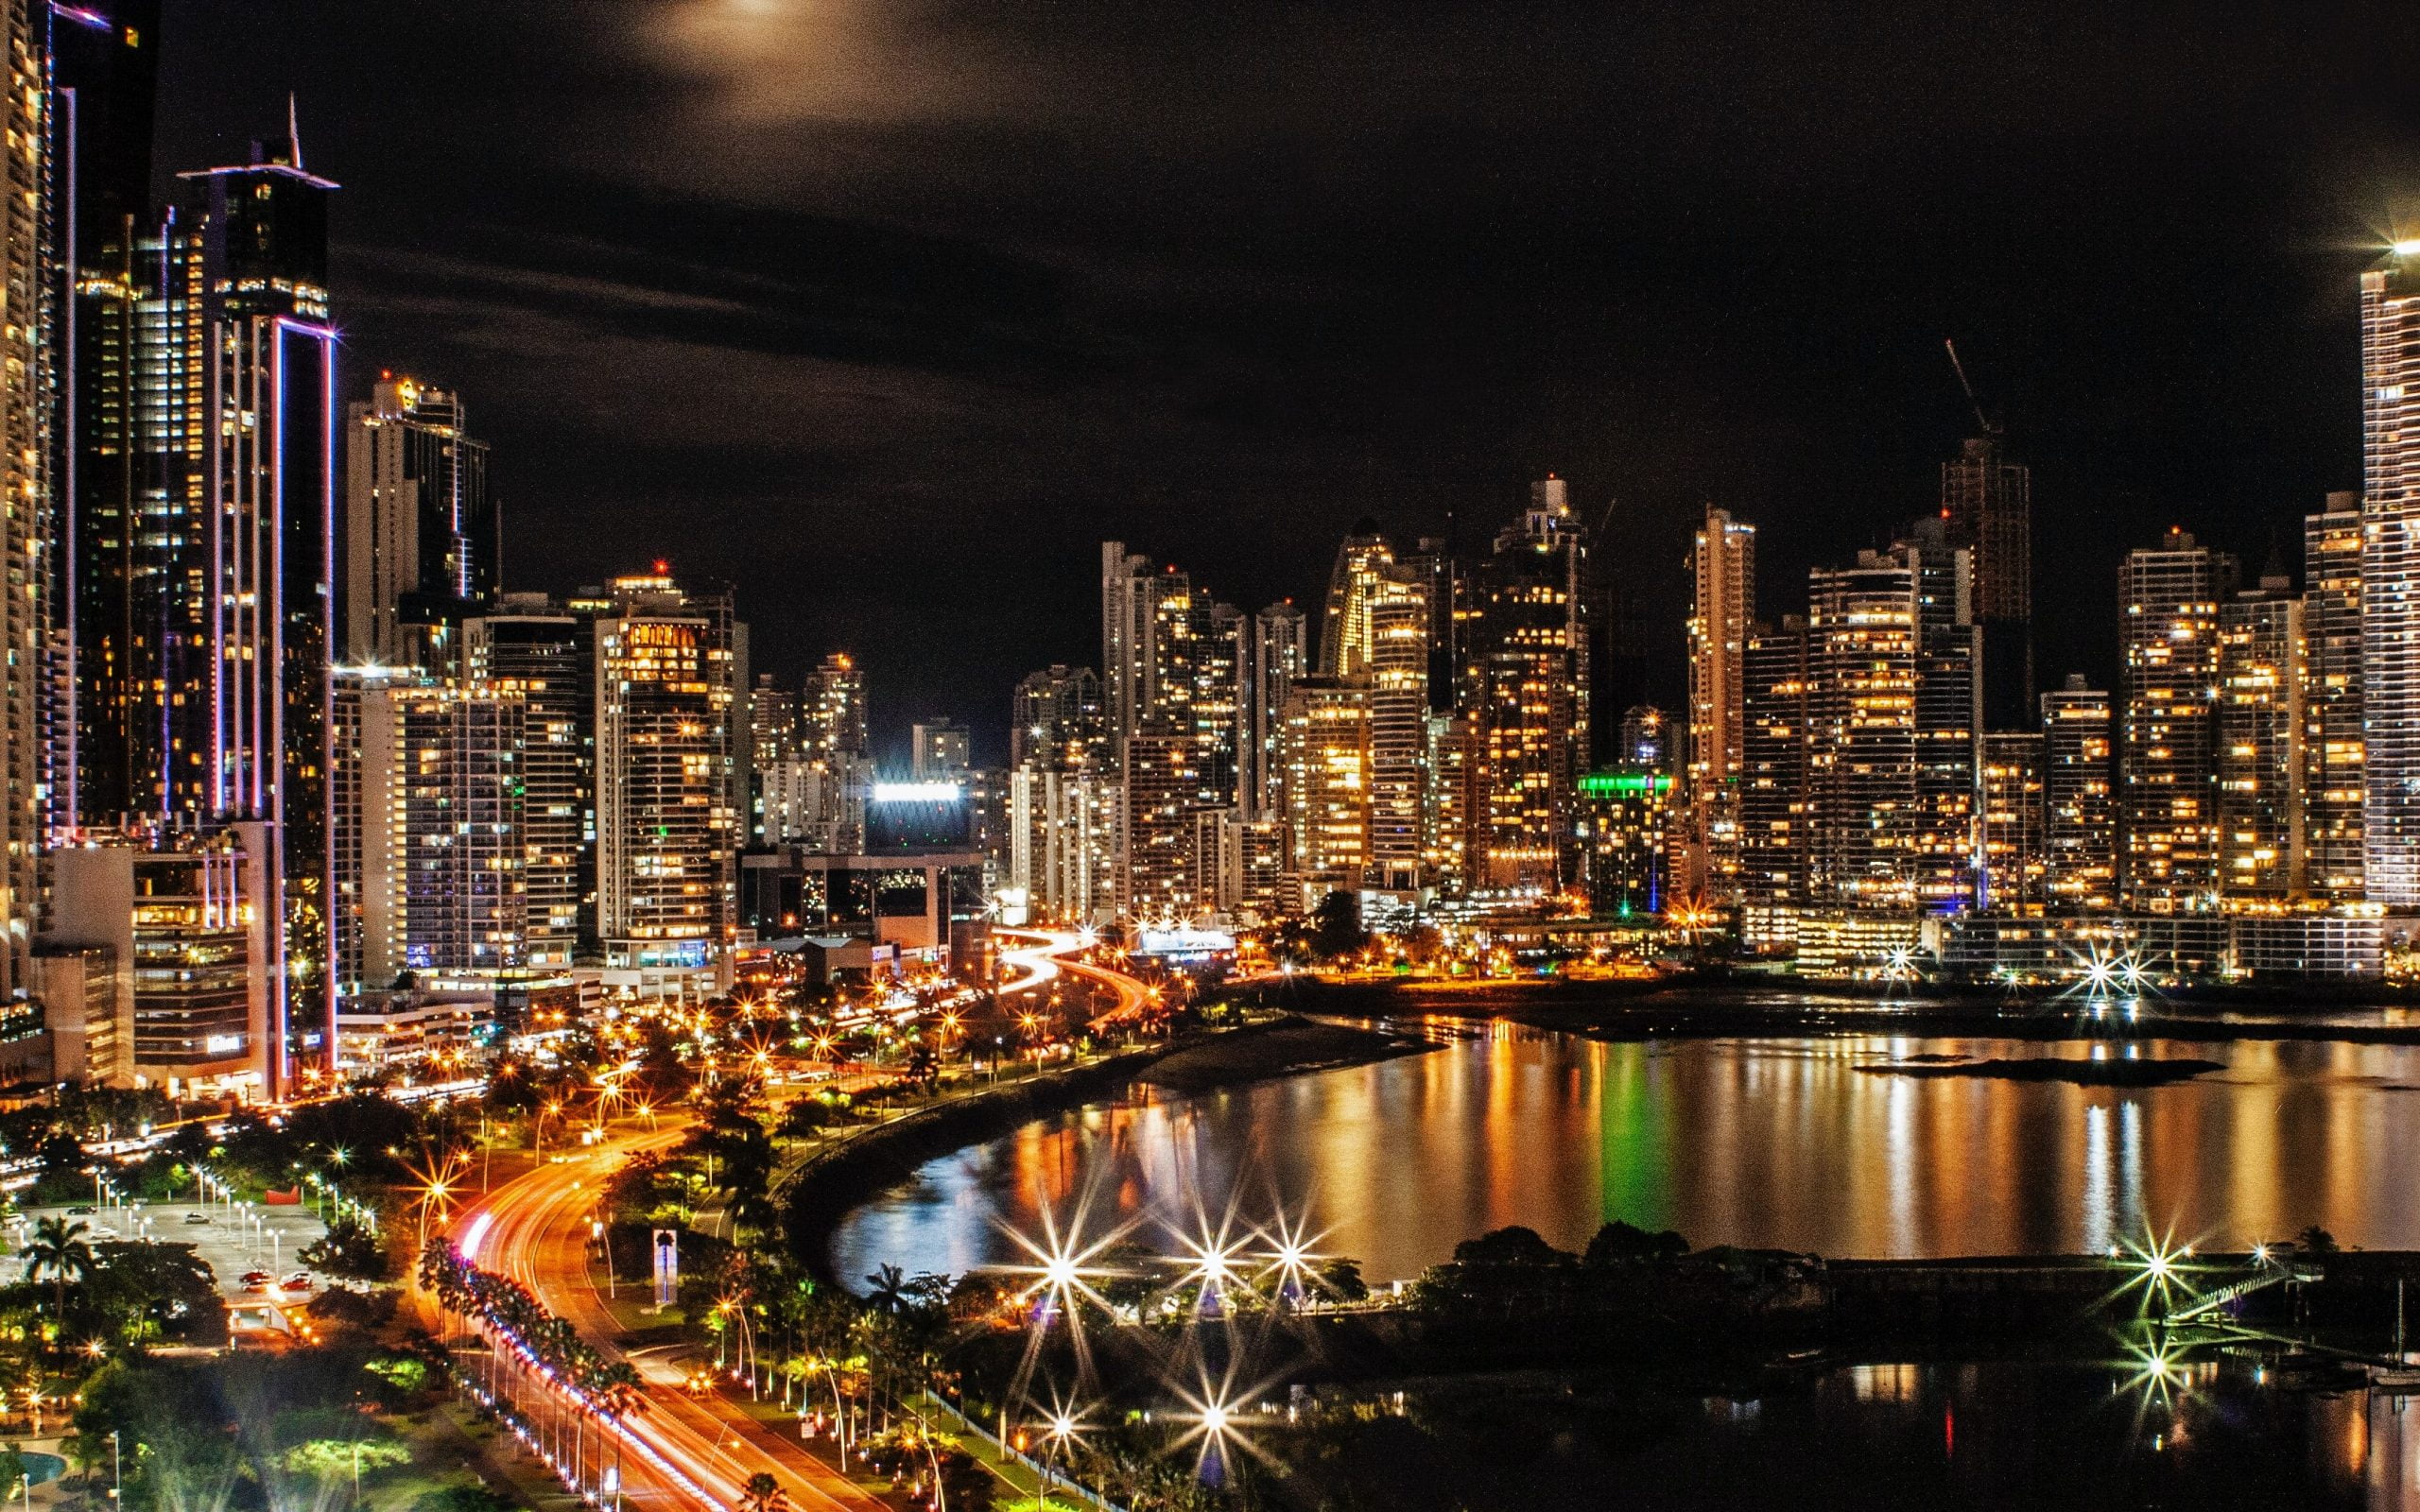 Panama City at night - LIVING IN PANAMA AS A FOREIGNER